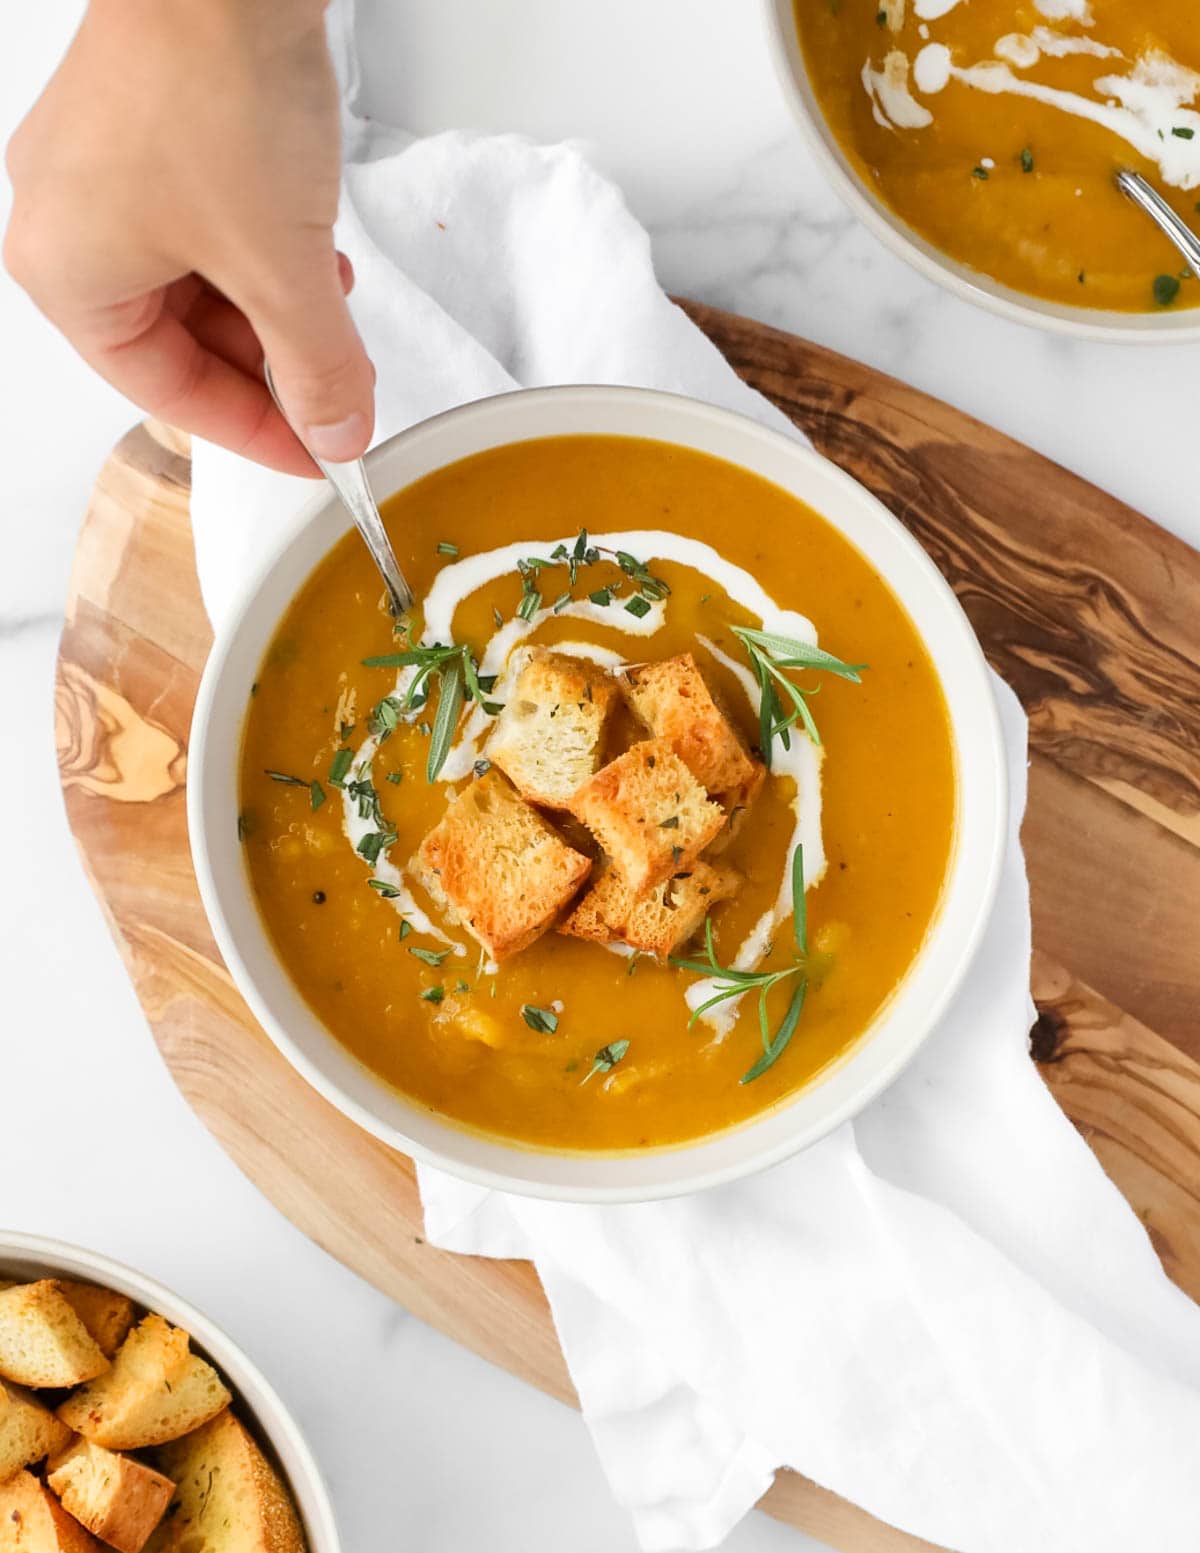 A hand dipping a spoon into a bowl of orange soup. There are herbs, croutons, and coconut milk on top of the soup.